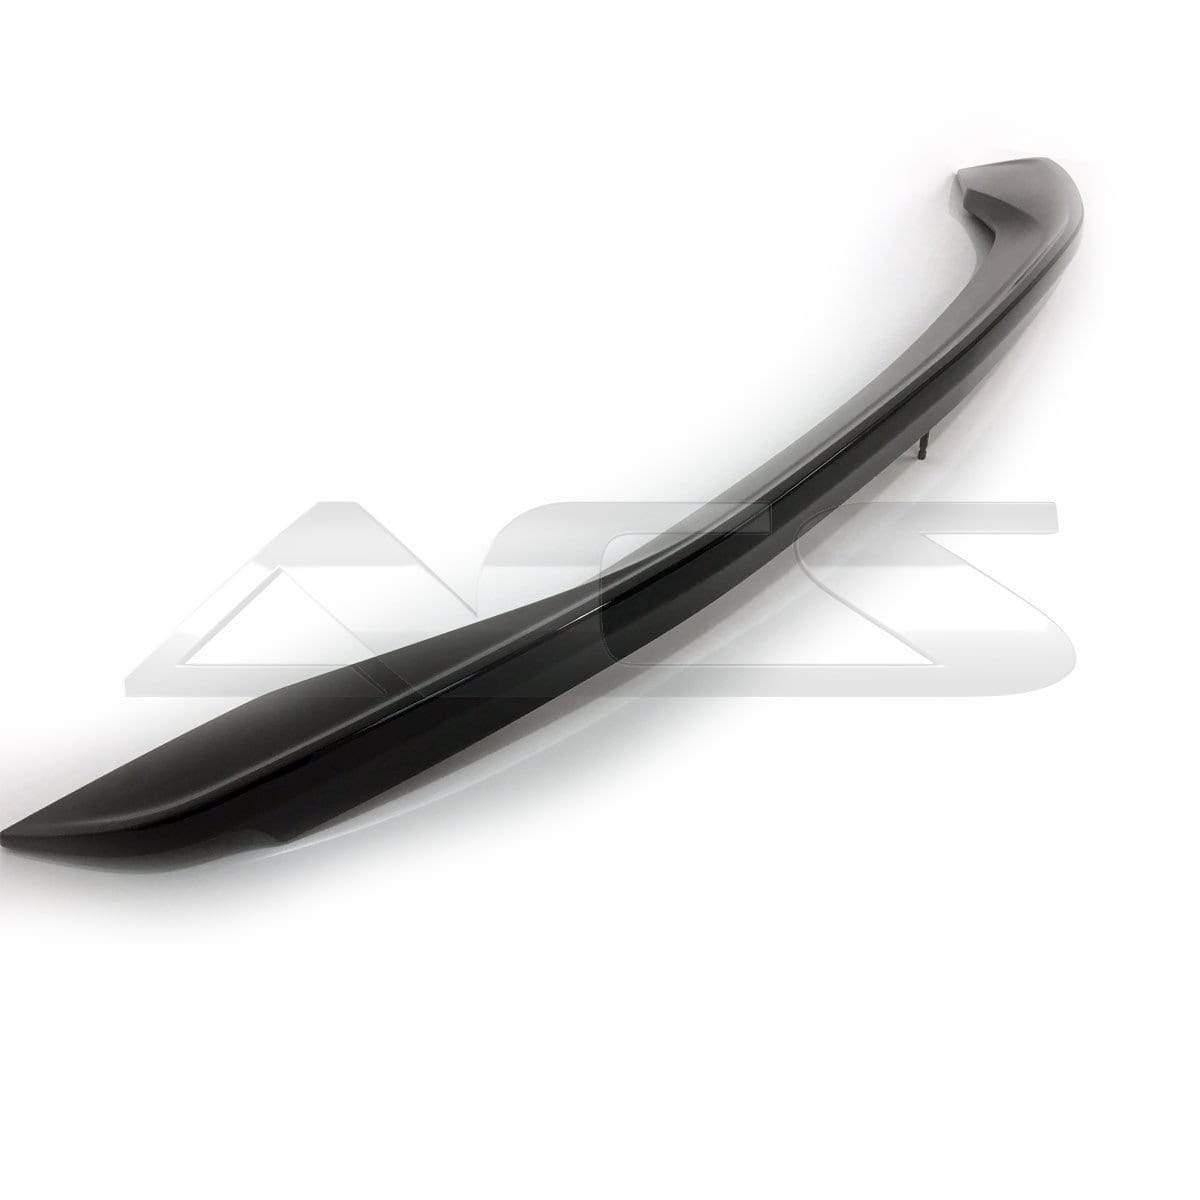 ACS Composite High Wing Spoiler in Mosaic Black Metallic for Camaro Coupe 16-18 V6 I4 | SKU 48-4-053 GB8